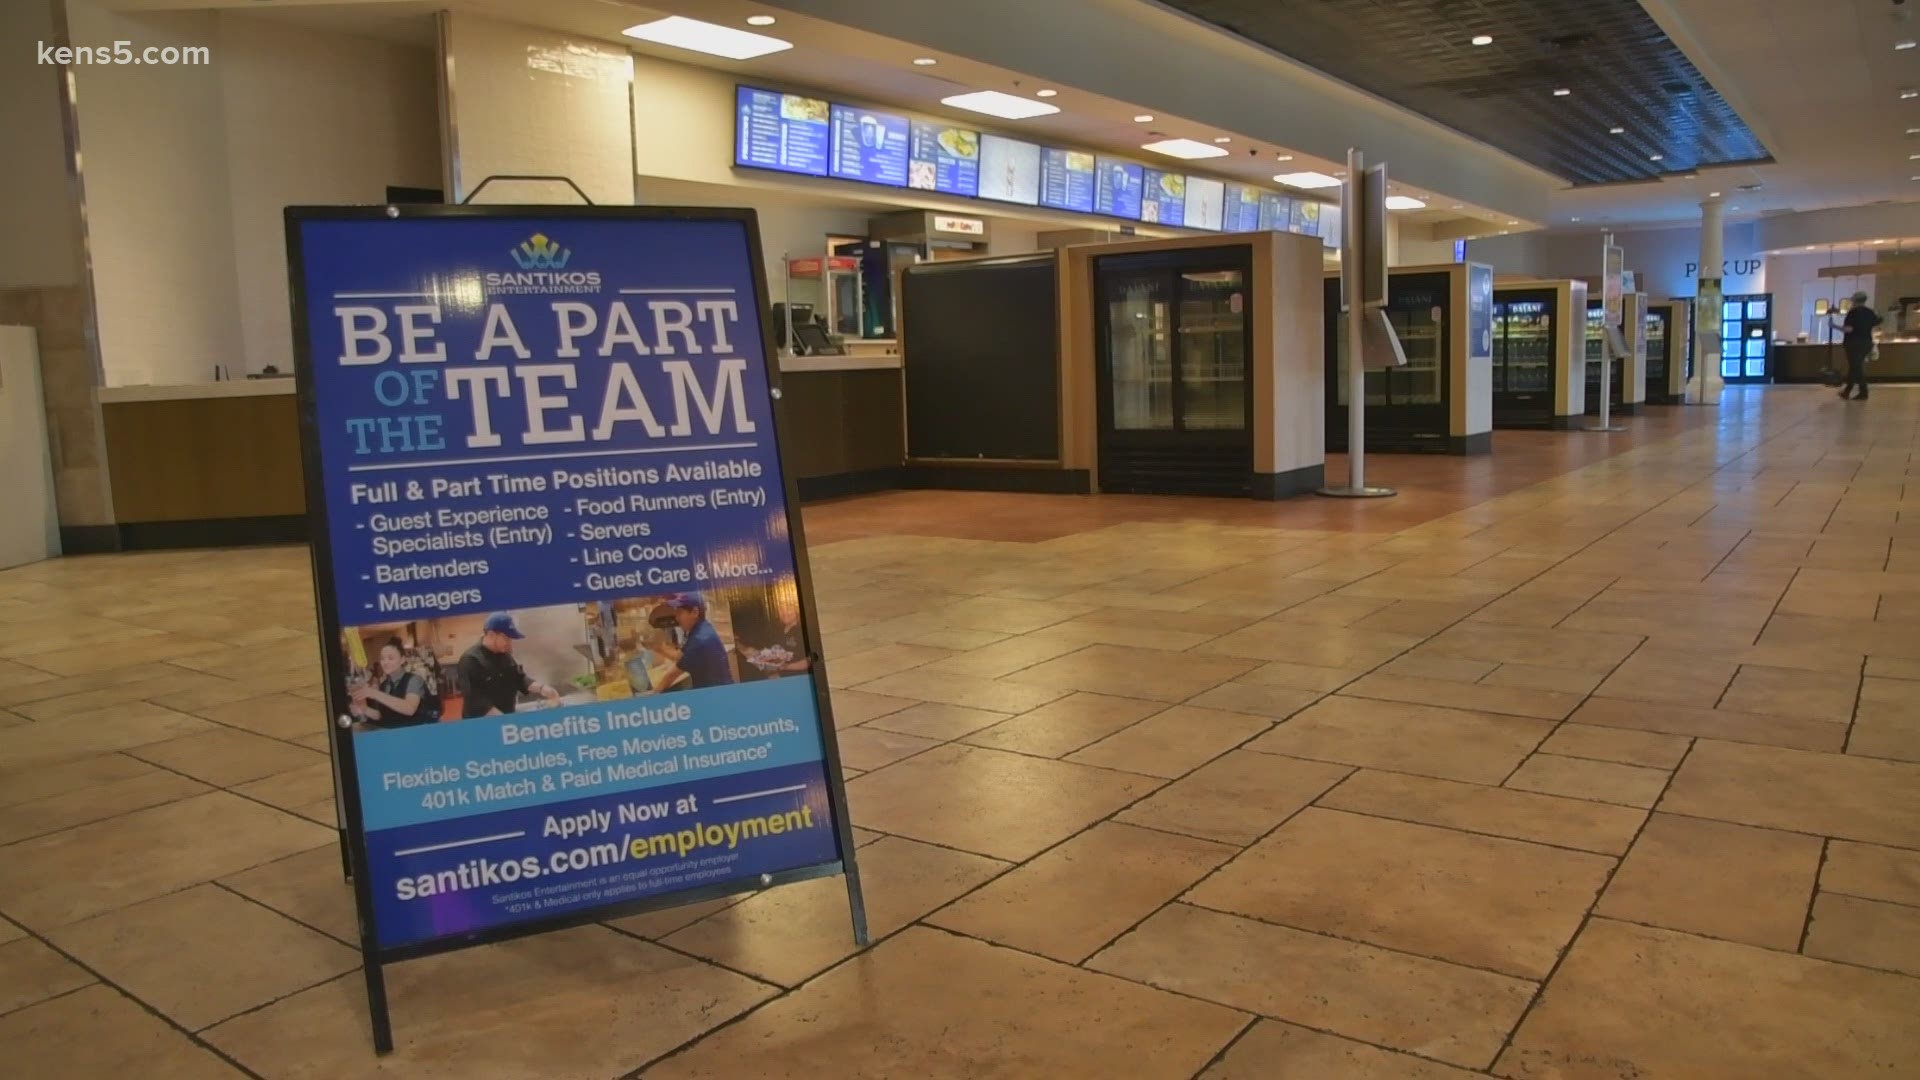 San Antonio's Santikos Theaters is looking to grow their staff, and they're willing to pay out big bucks to make sure the best people apply.